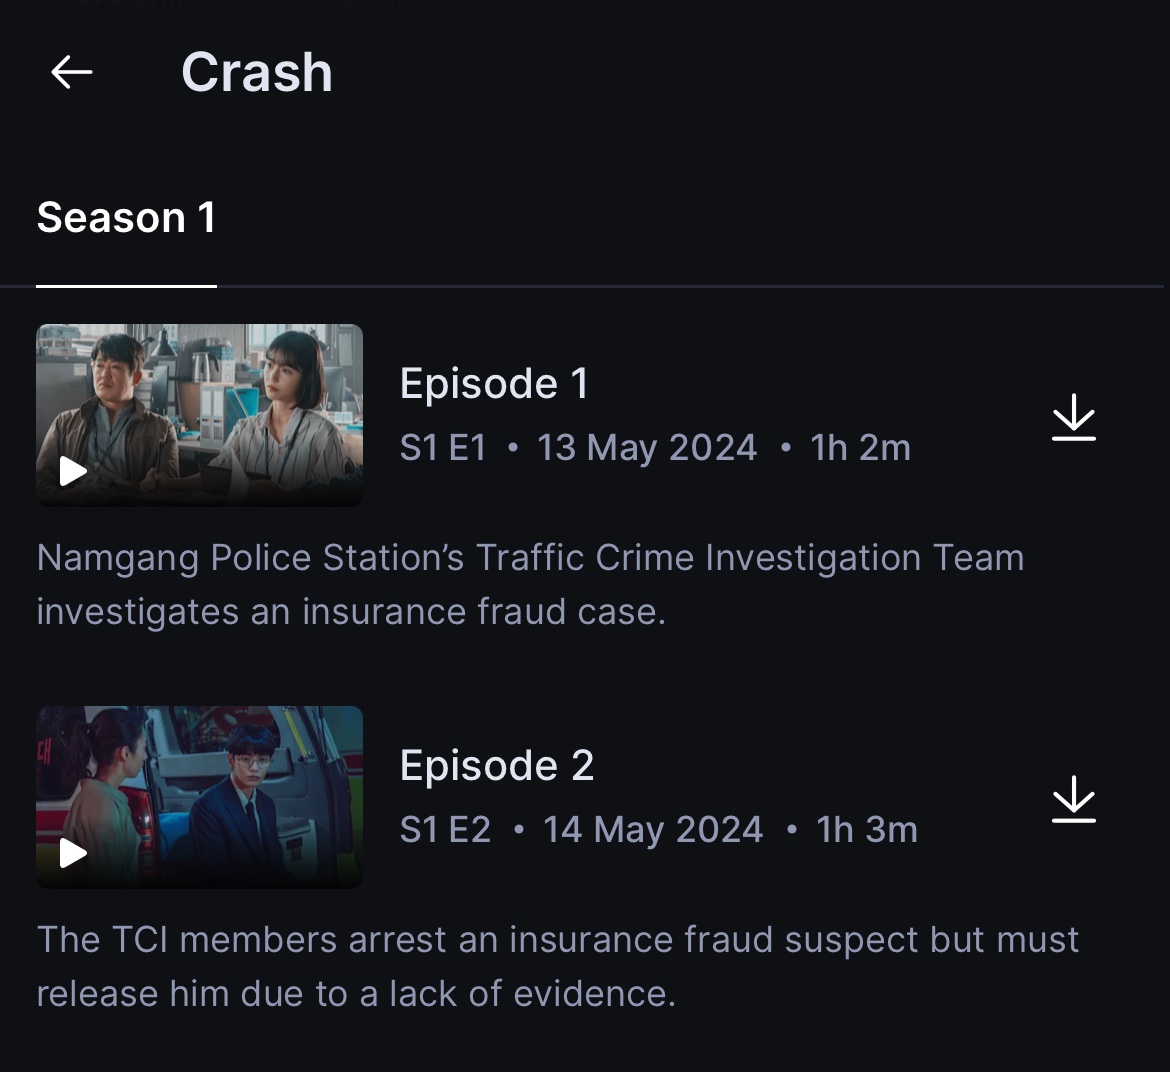 The first two episodes of the new drama “Crash” is now available on Disney+! Have you watched it yet? What do you think? Share your thoughts with us in the comments below! Catch the new episodes of “Crash”, every Monday and Tuesday, only on @disneyplusph. Read more about